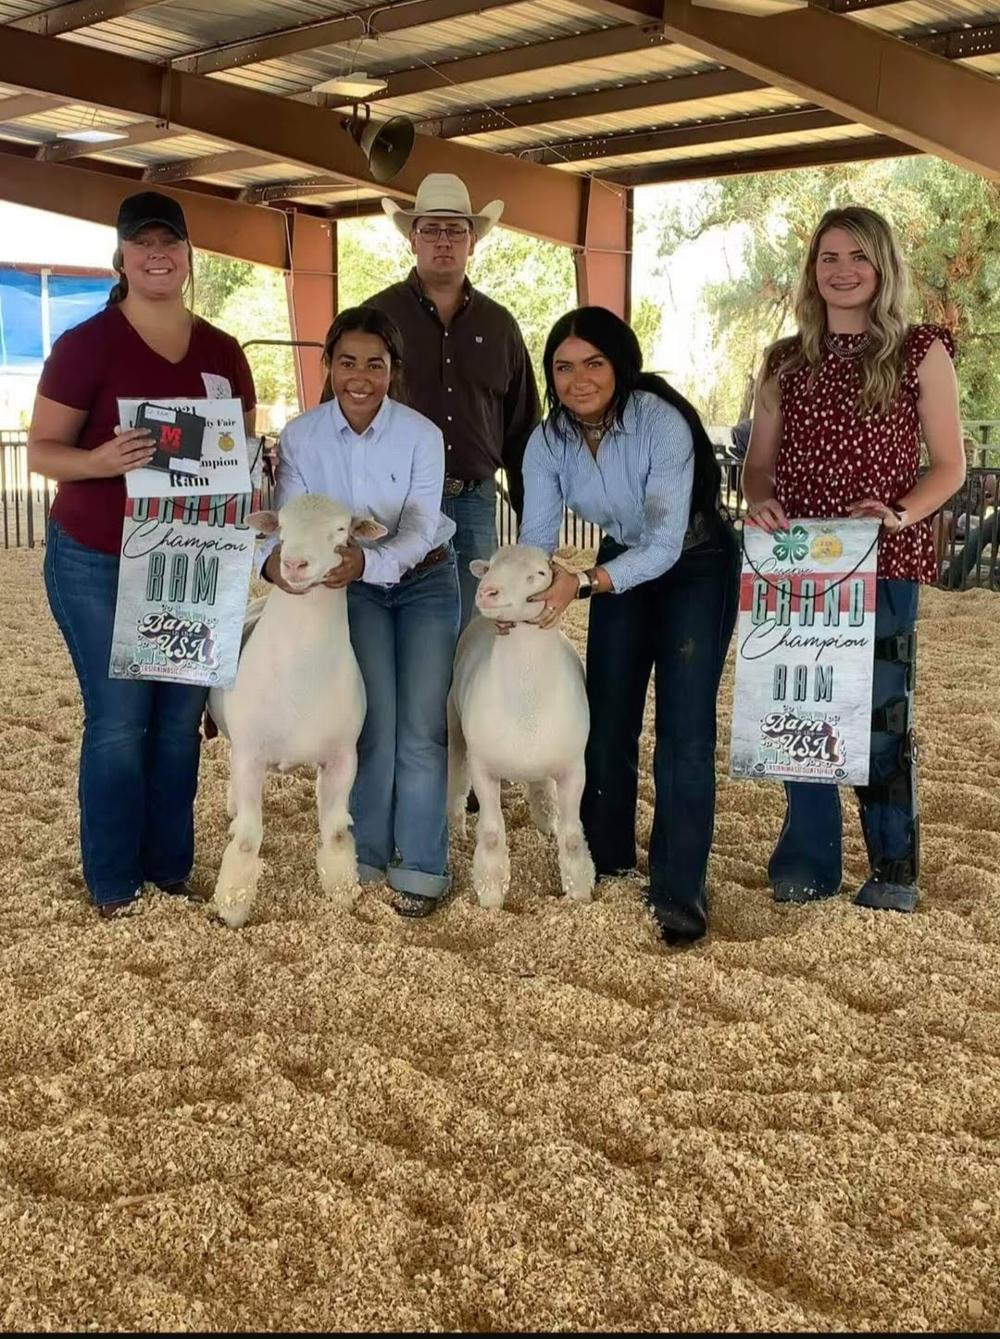 Our lodge donated the buckle for Grand Champion Ram at the Las Animas County Fair. Lecturing Knight, Brittany Petsche, was their to present to the buckle!